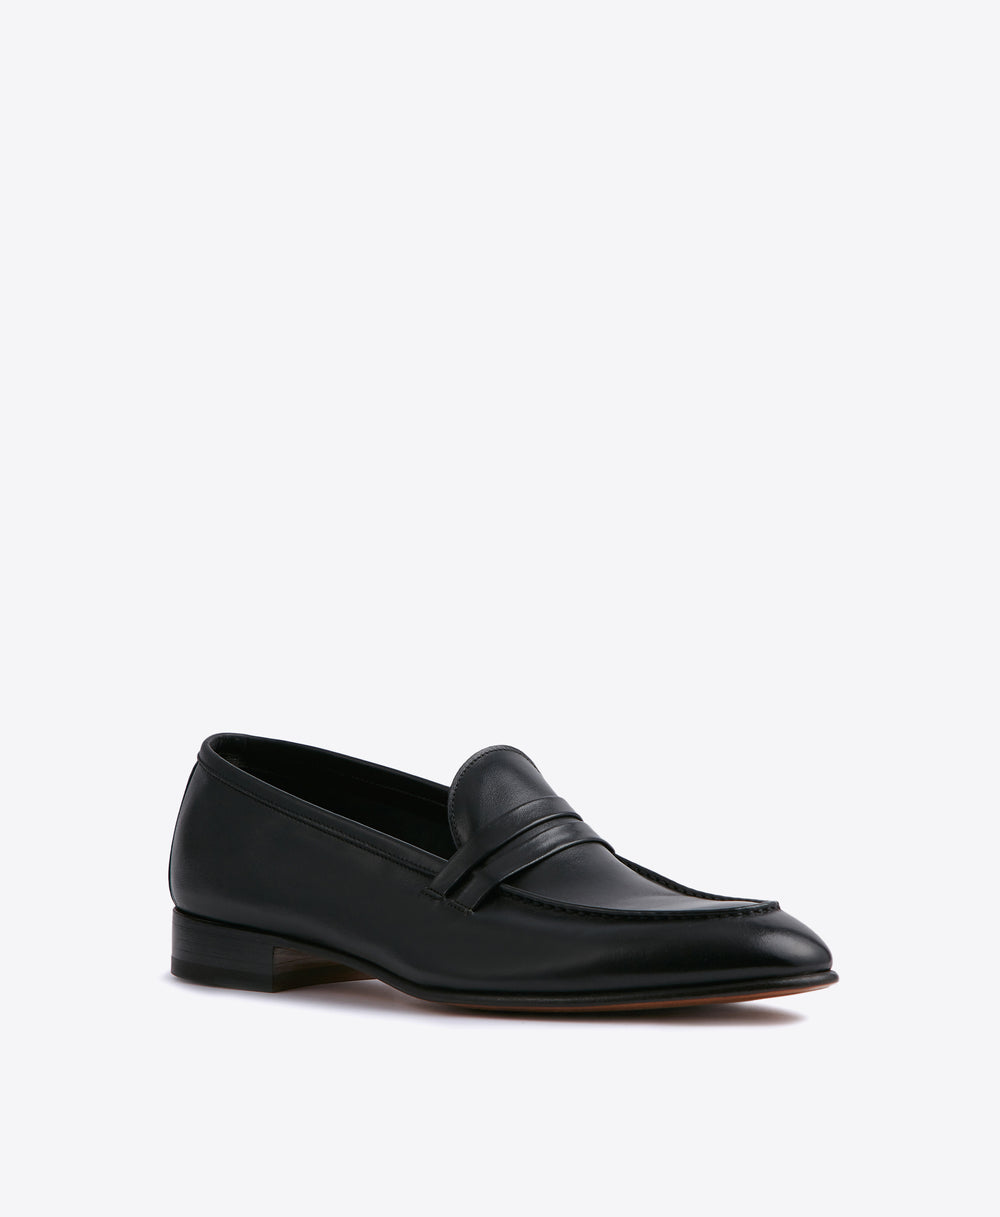 Men's Black Leather Flat Loafers Malone Souliers